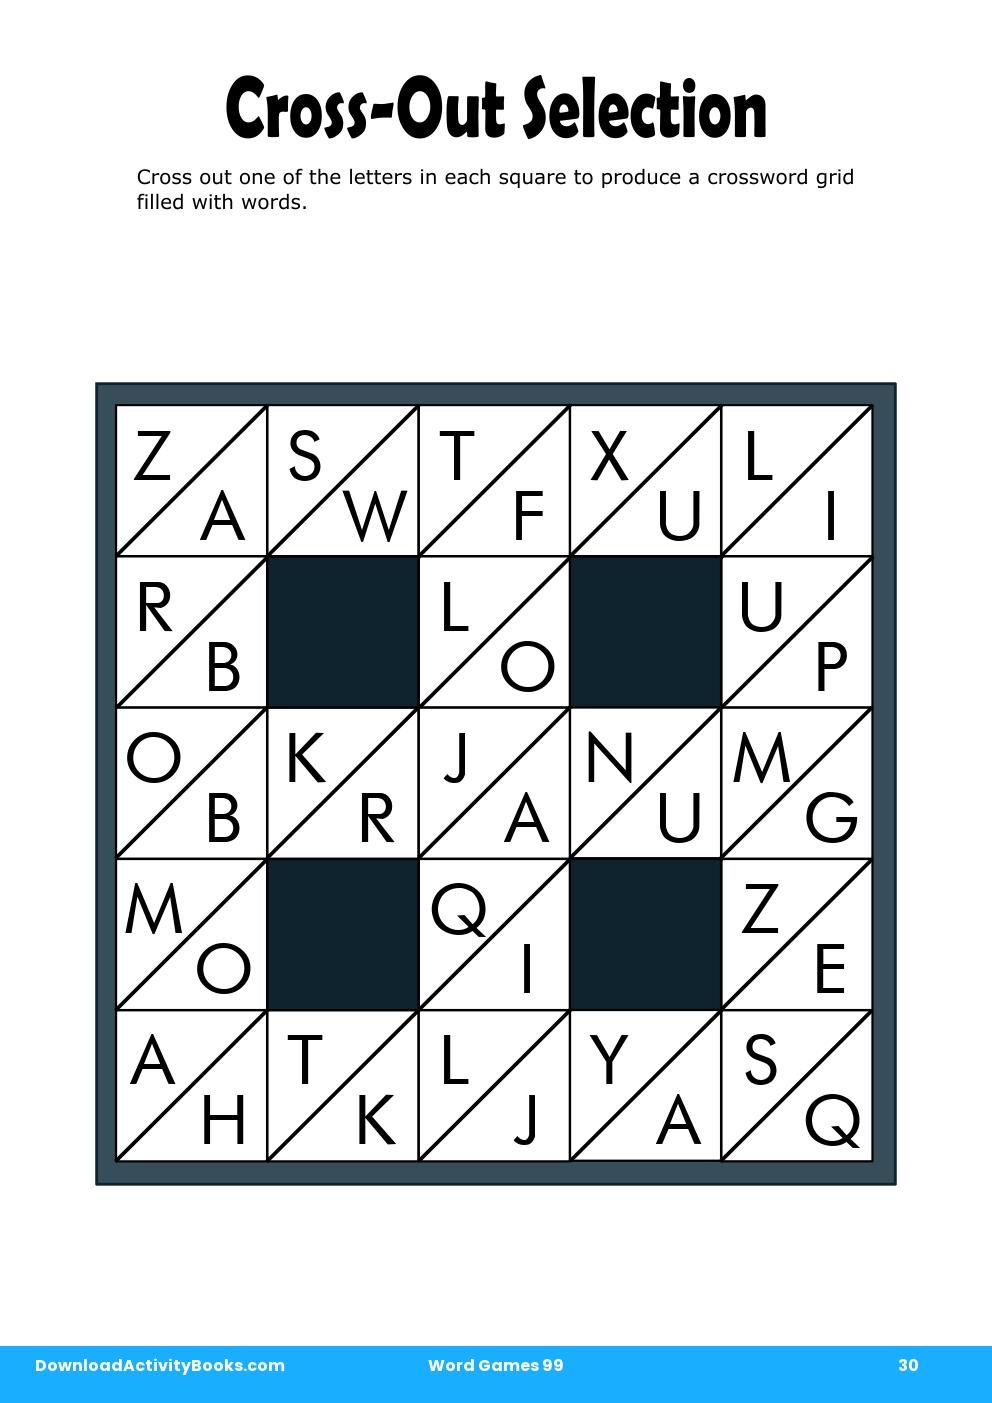 Cross-Out Selection in Word Games 99